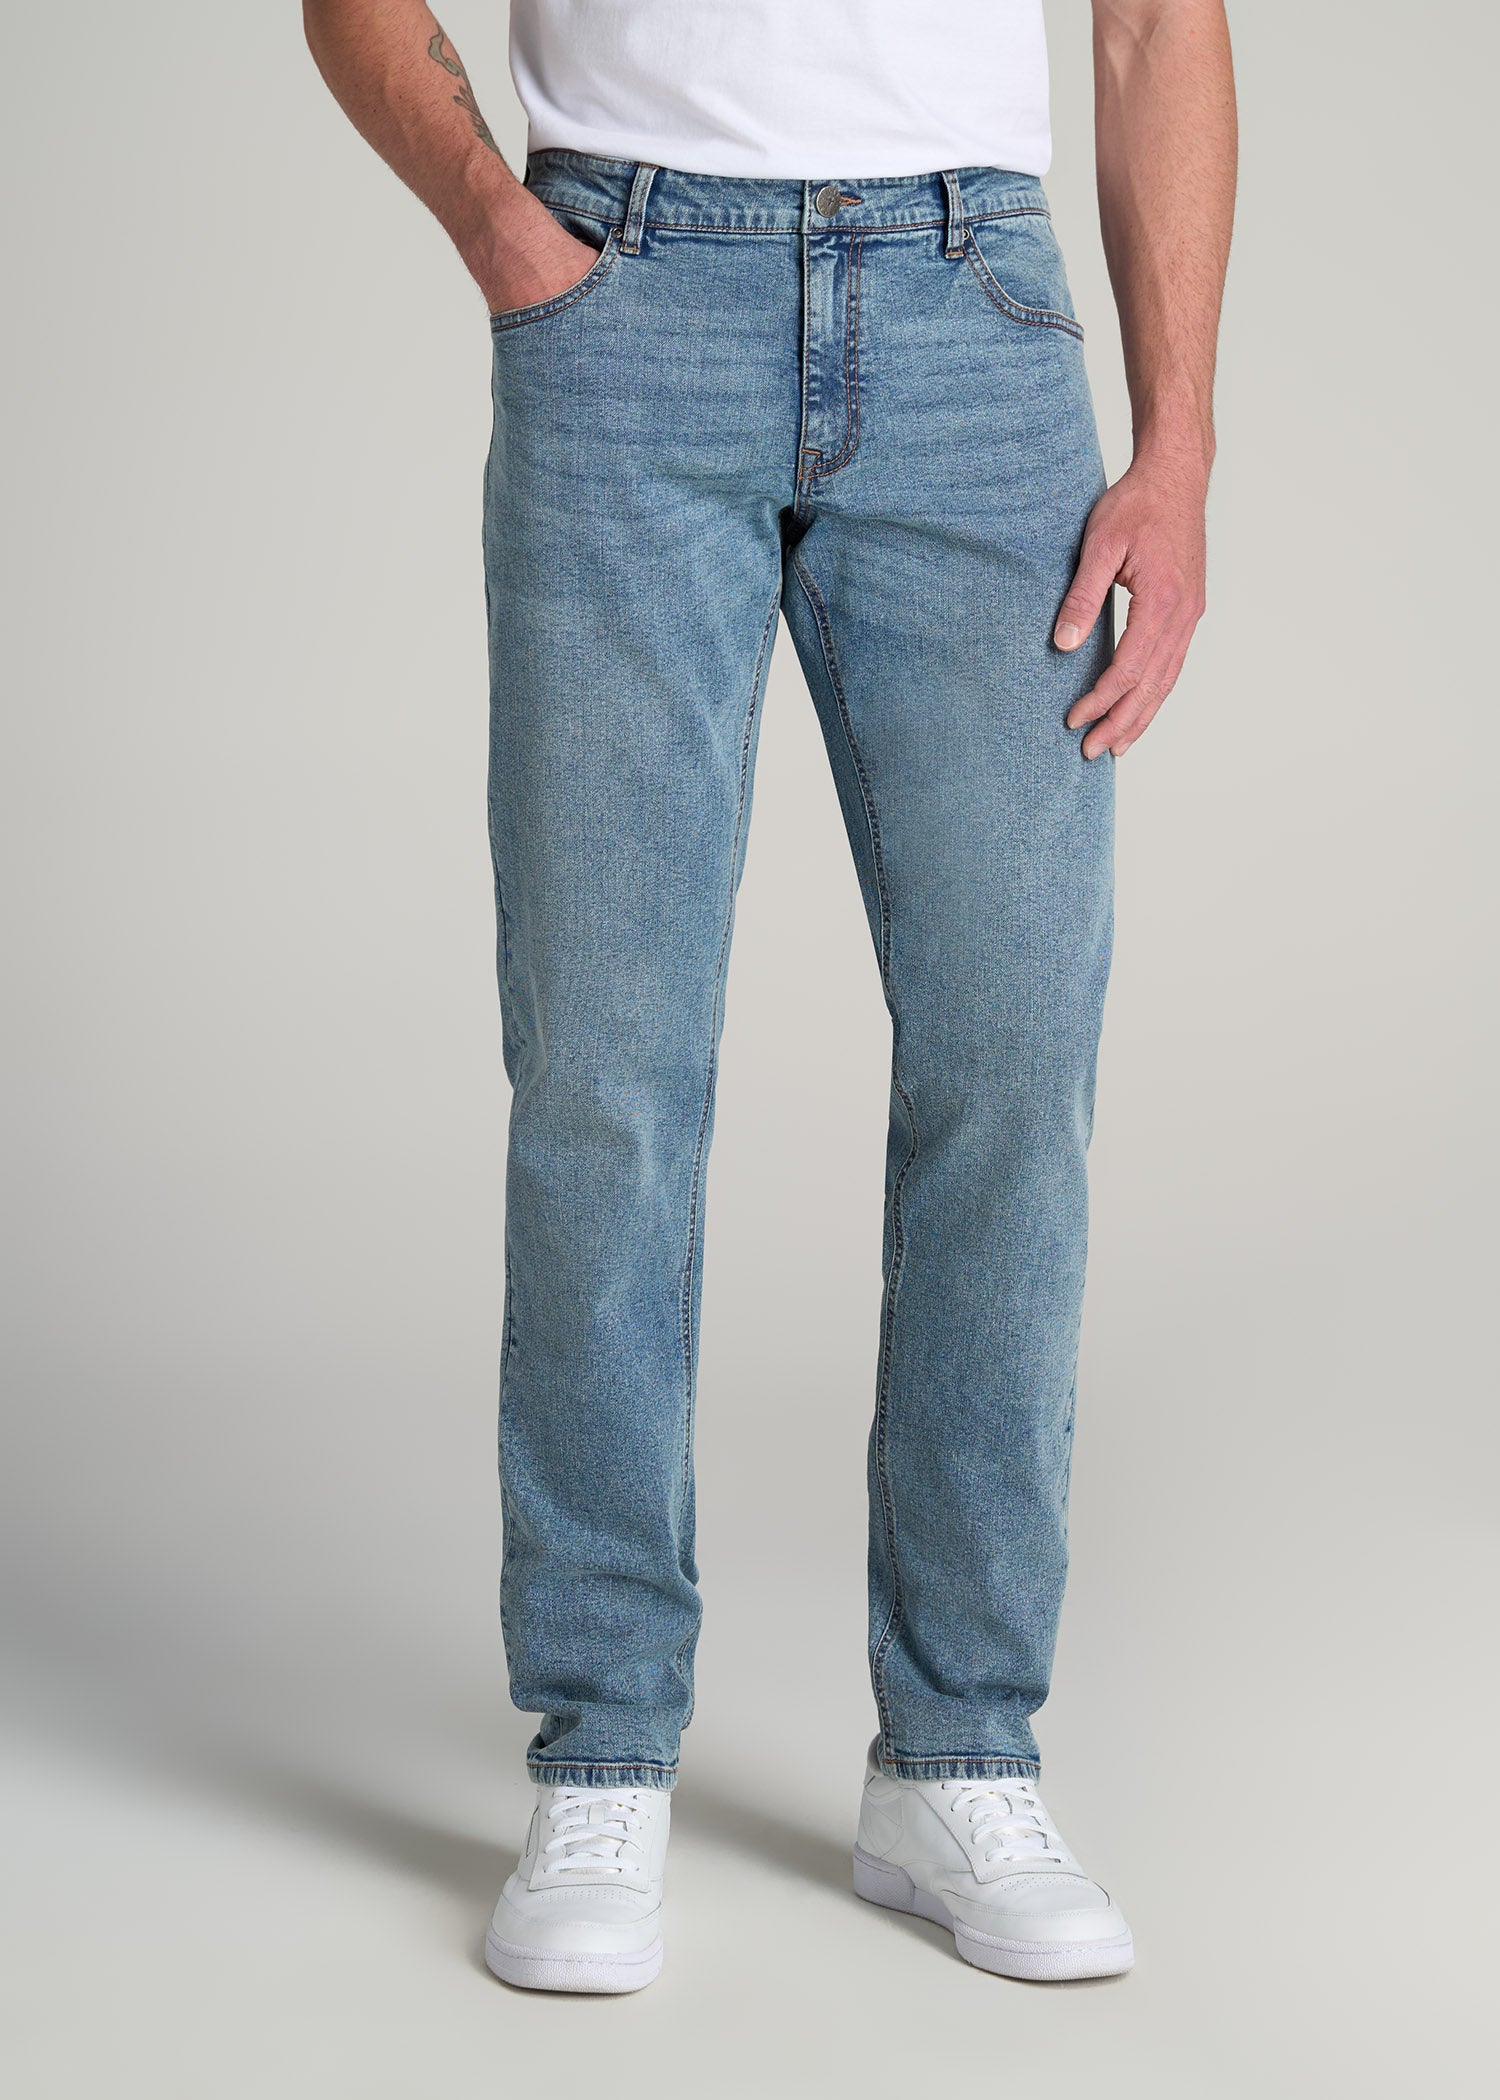 Carman Tapered Jeans For Tall Men Vintage Faded Blue | American Tall